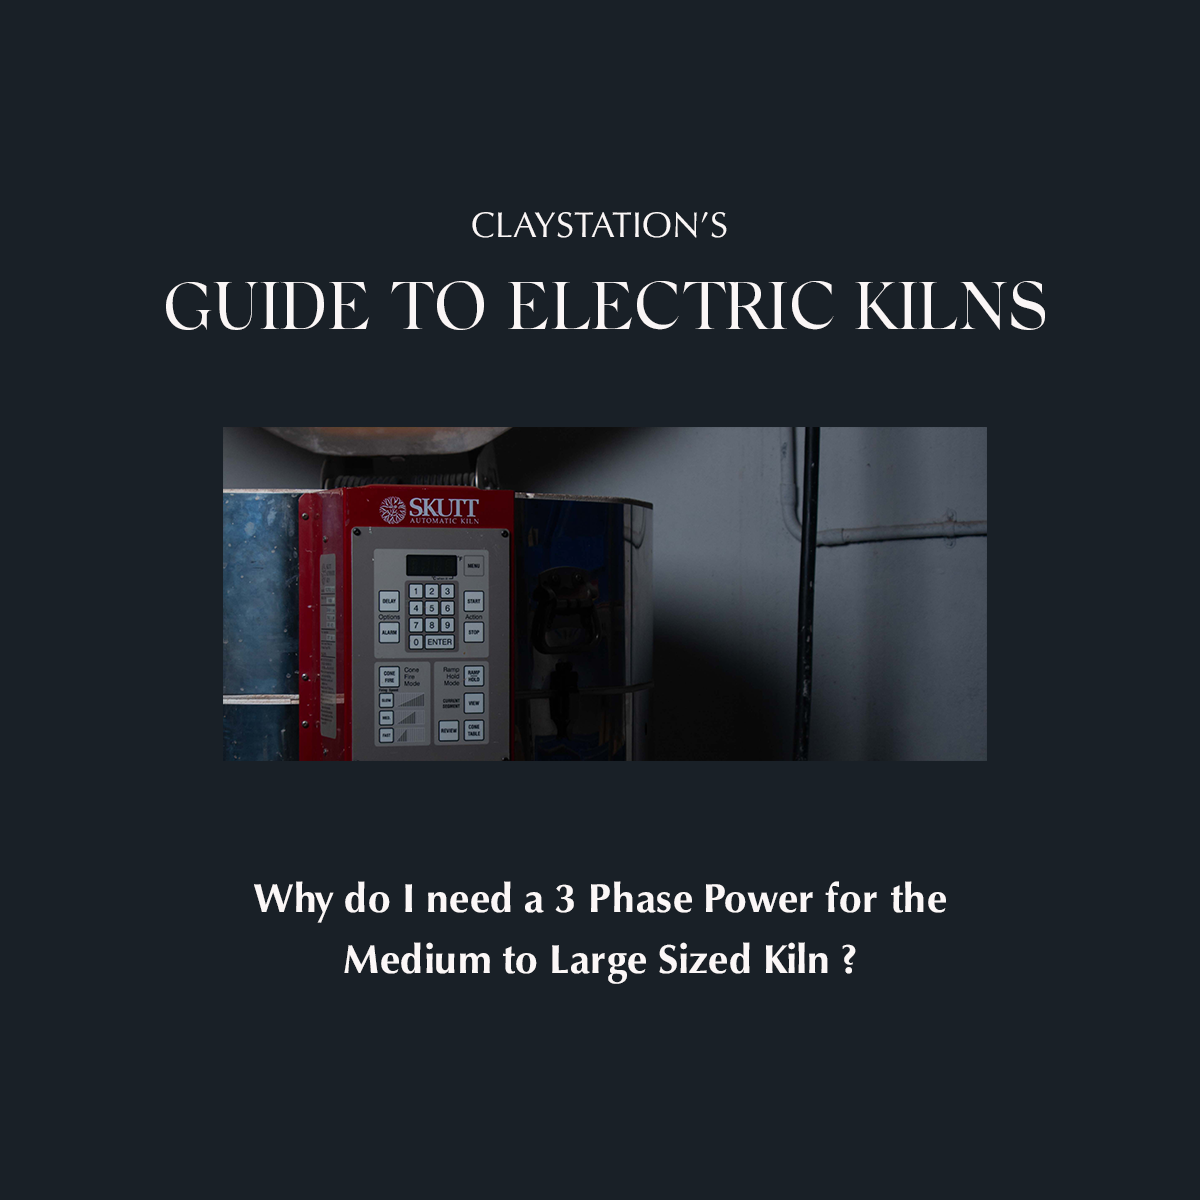 When do I need a 3 phase connection for an electric kiln?